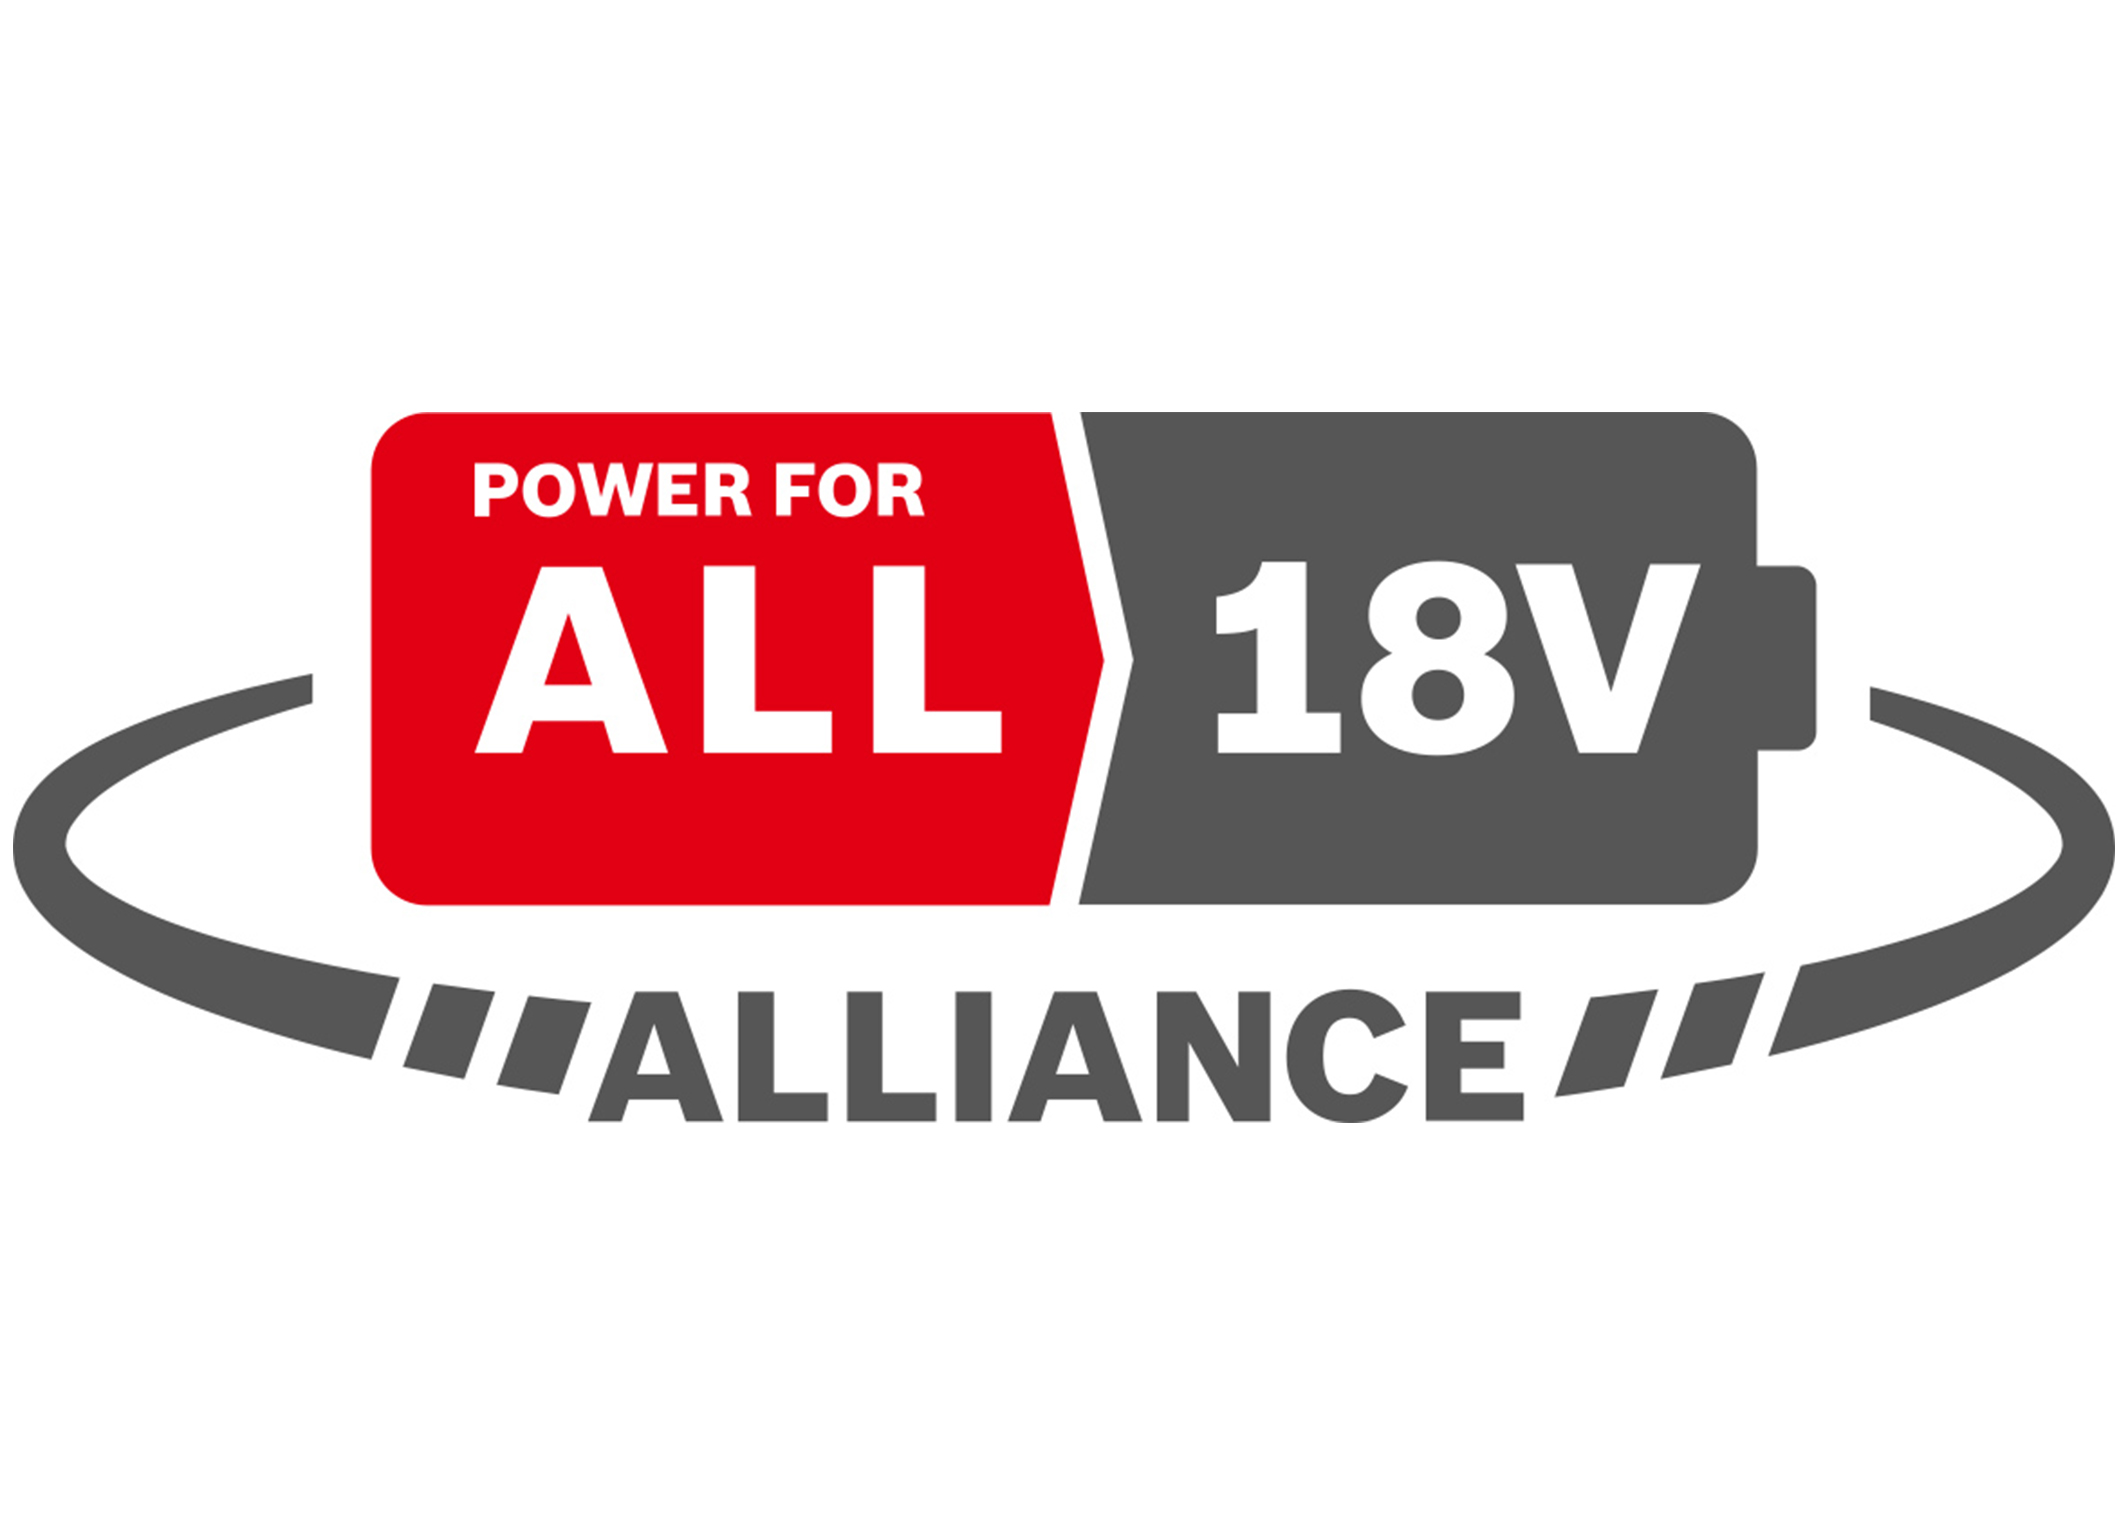 Concentrated expertise for products around the home: Three new partners for the ‘Power for All Alliance’